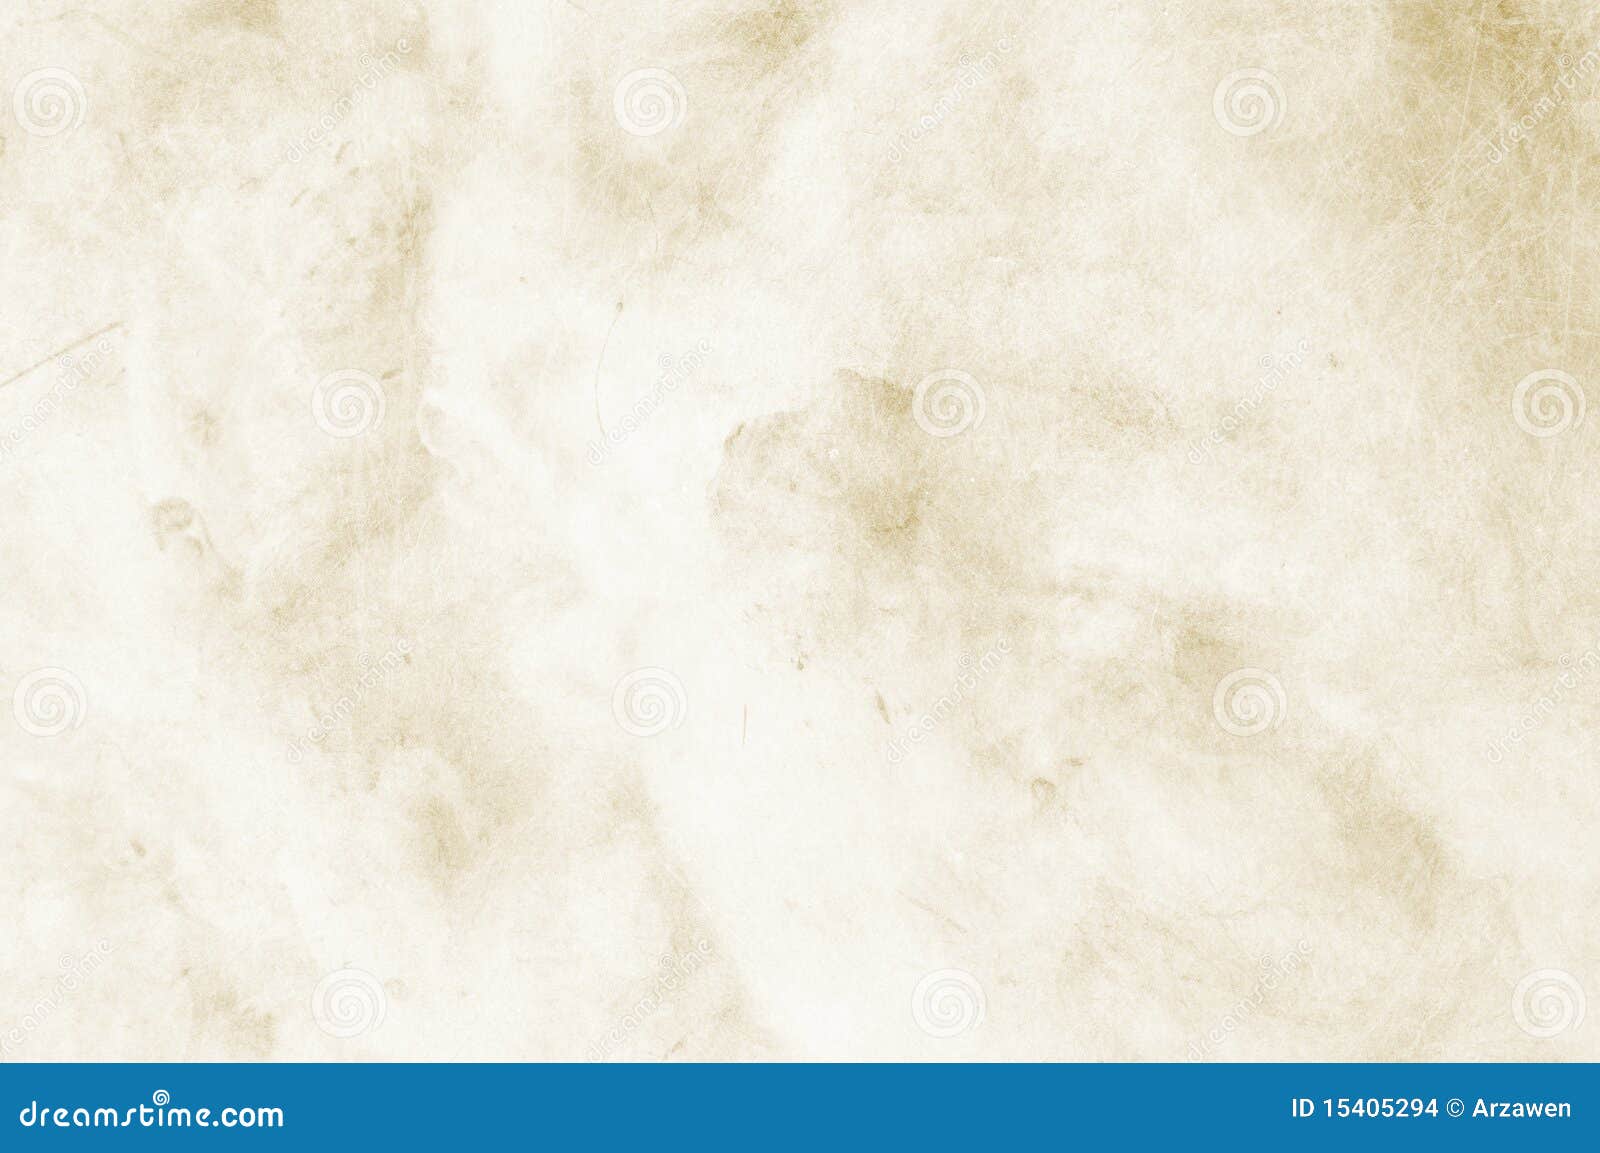 textured clear beige background with space